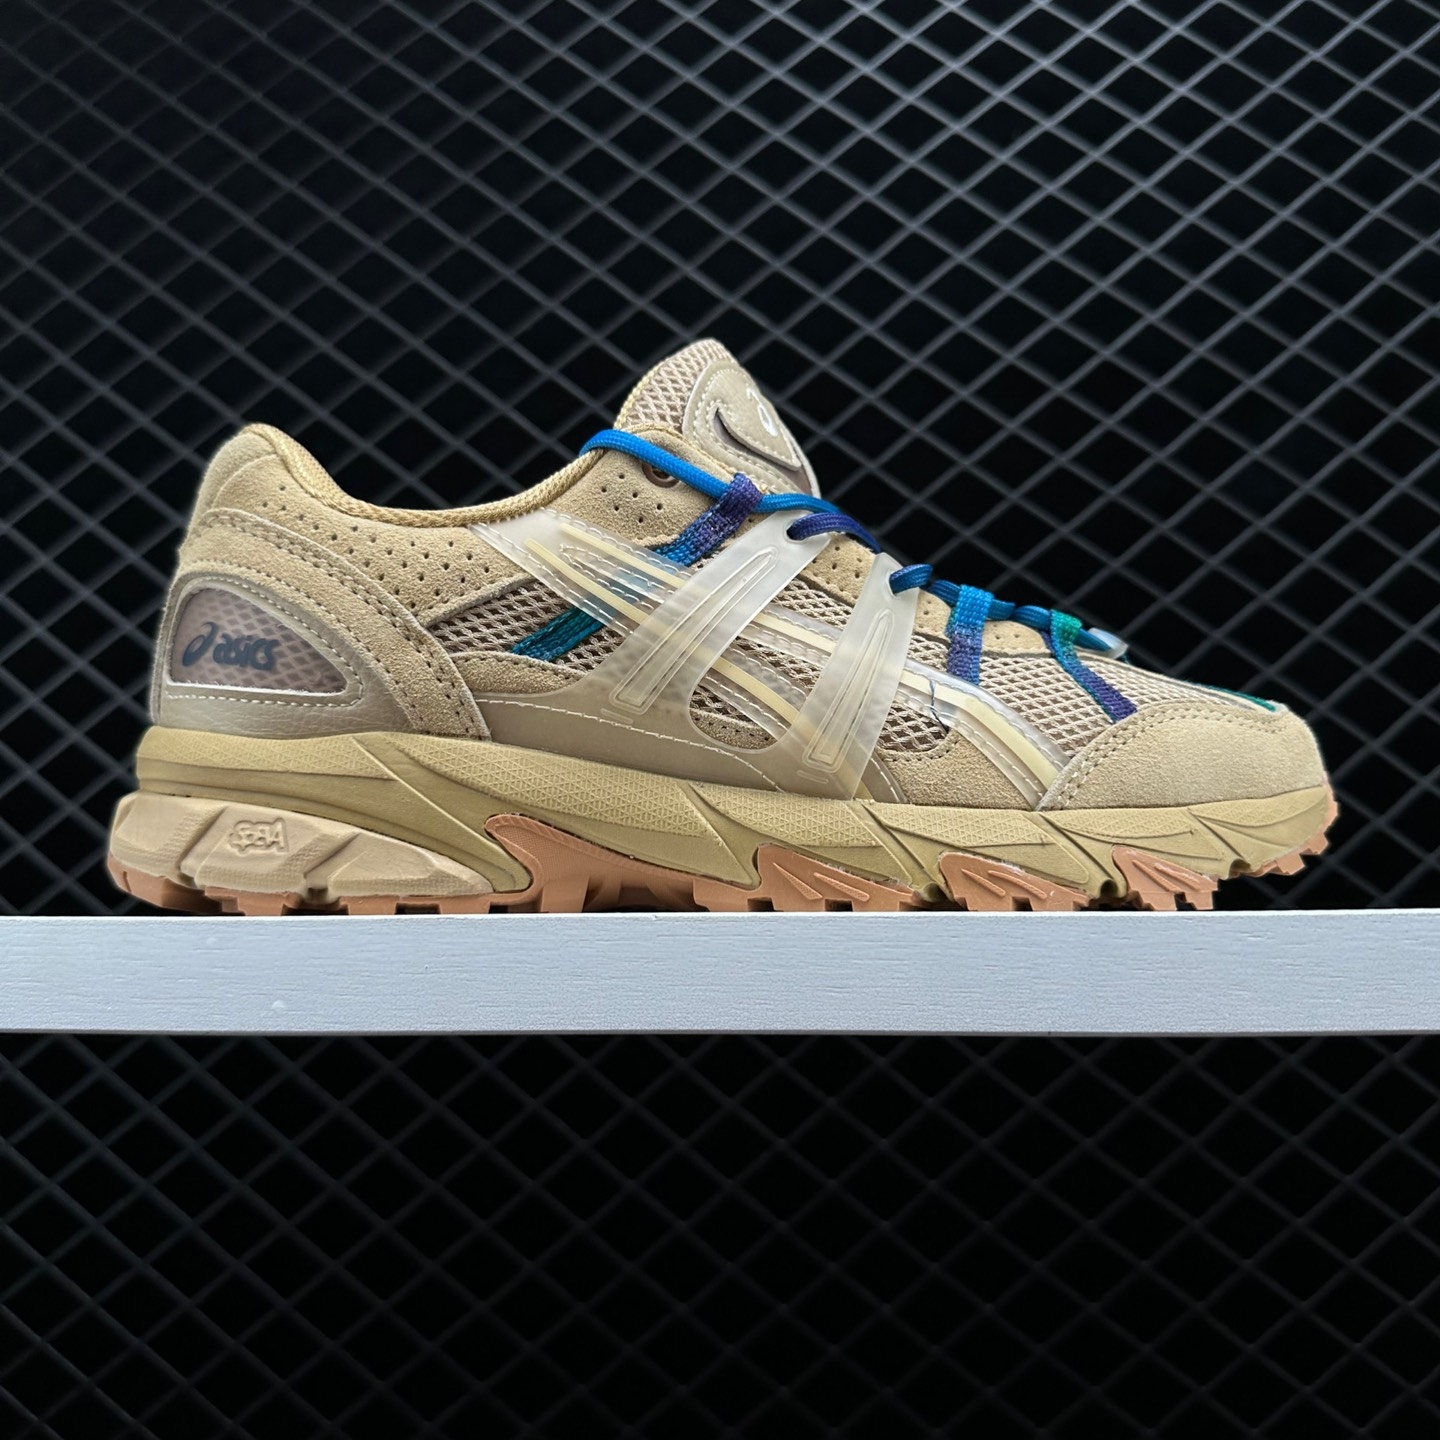 Asics Gel Sonoma 15-50 x A.P.C. Beige Blue 1203A226-200 - Trendy and Stylish Trail Running Shoes